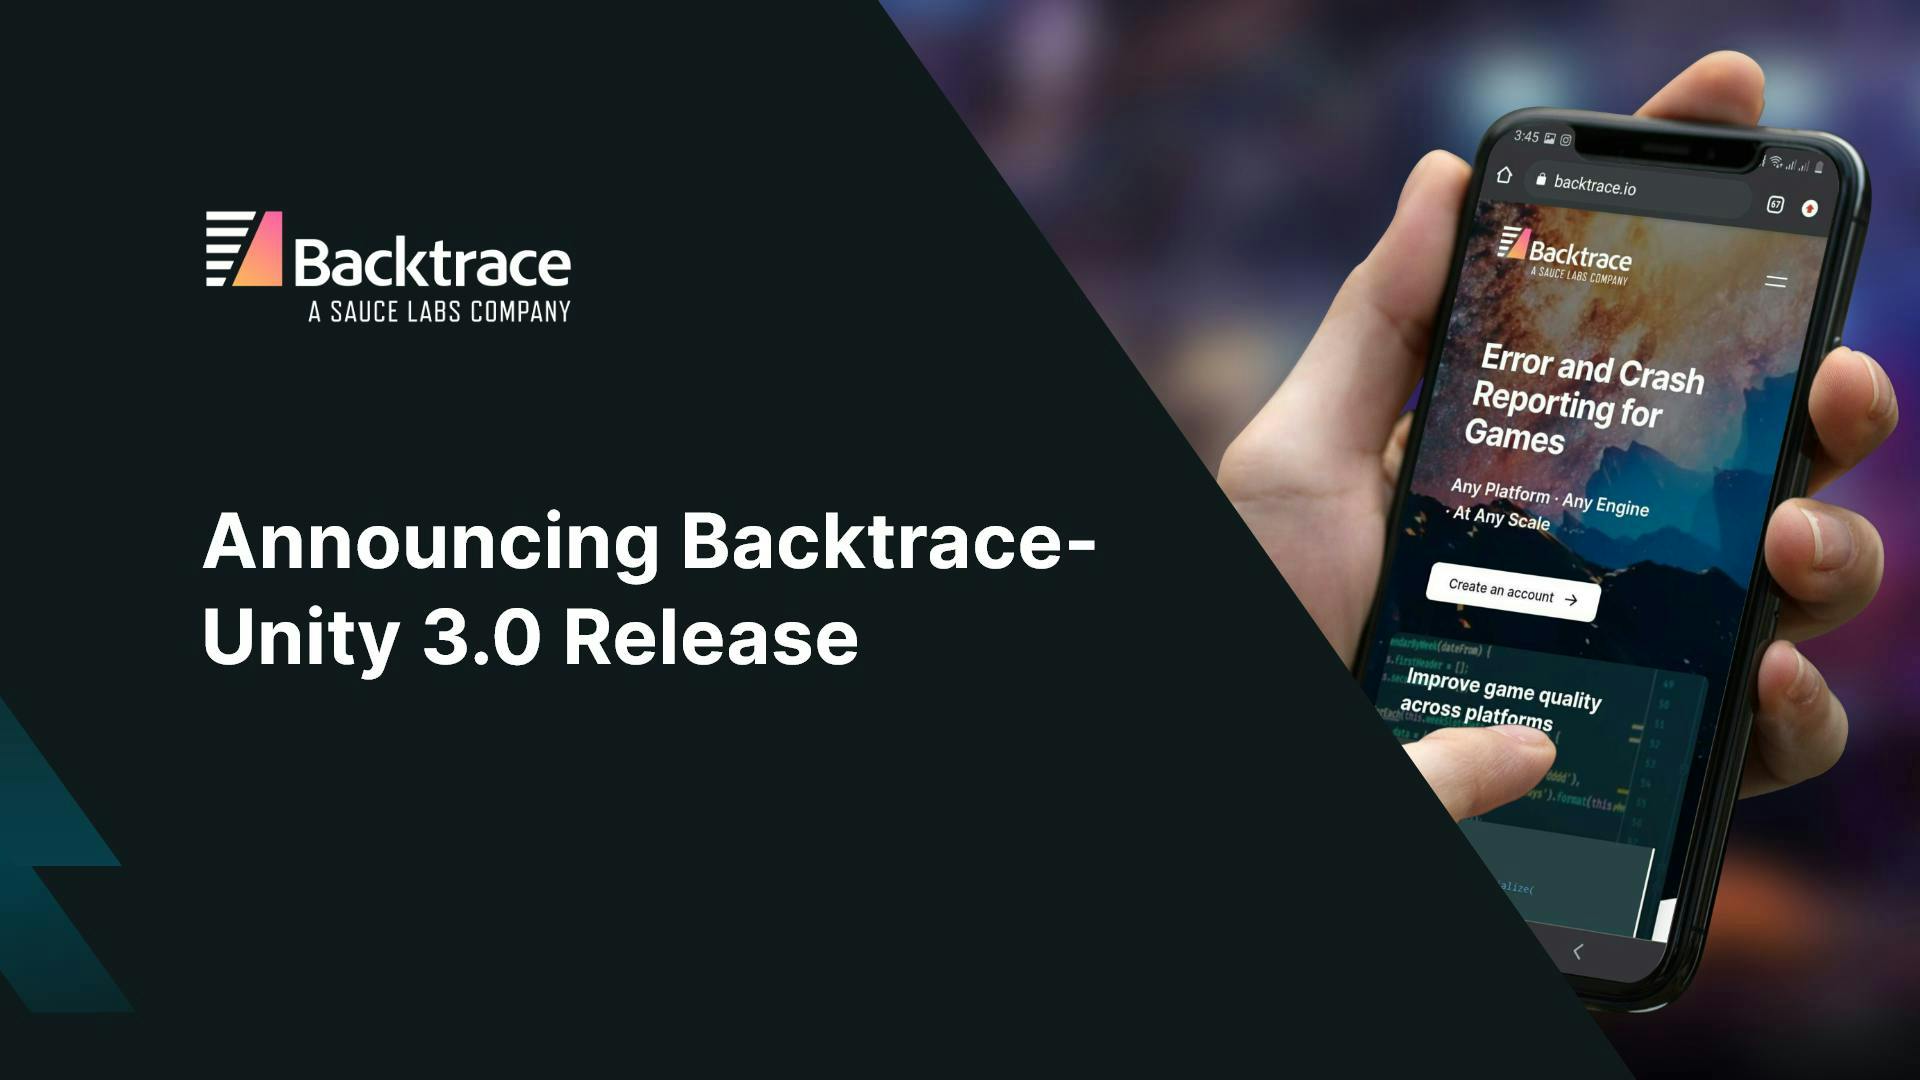 Thumbnail image for blog post: Announcing Backtrace-Unity 3.0.0